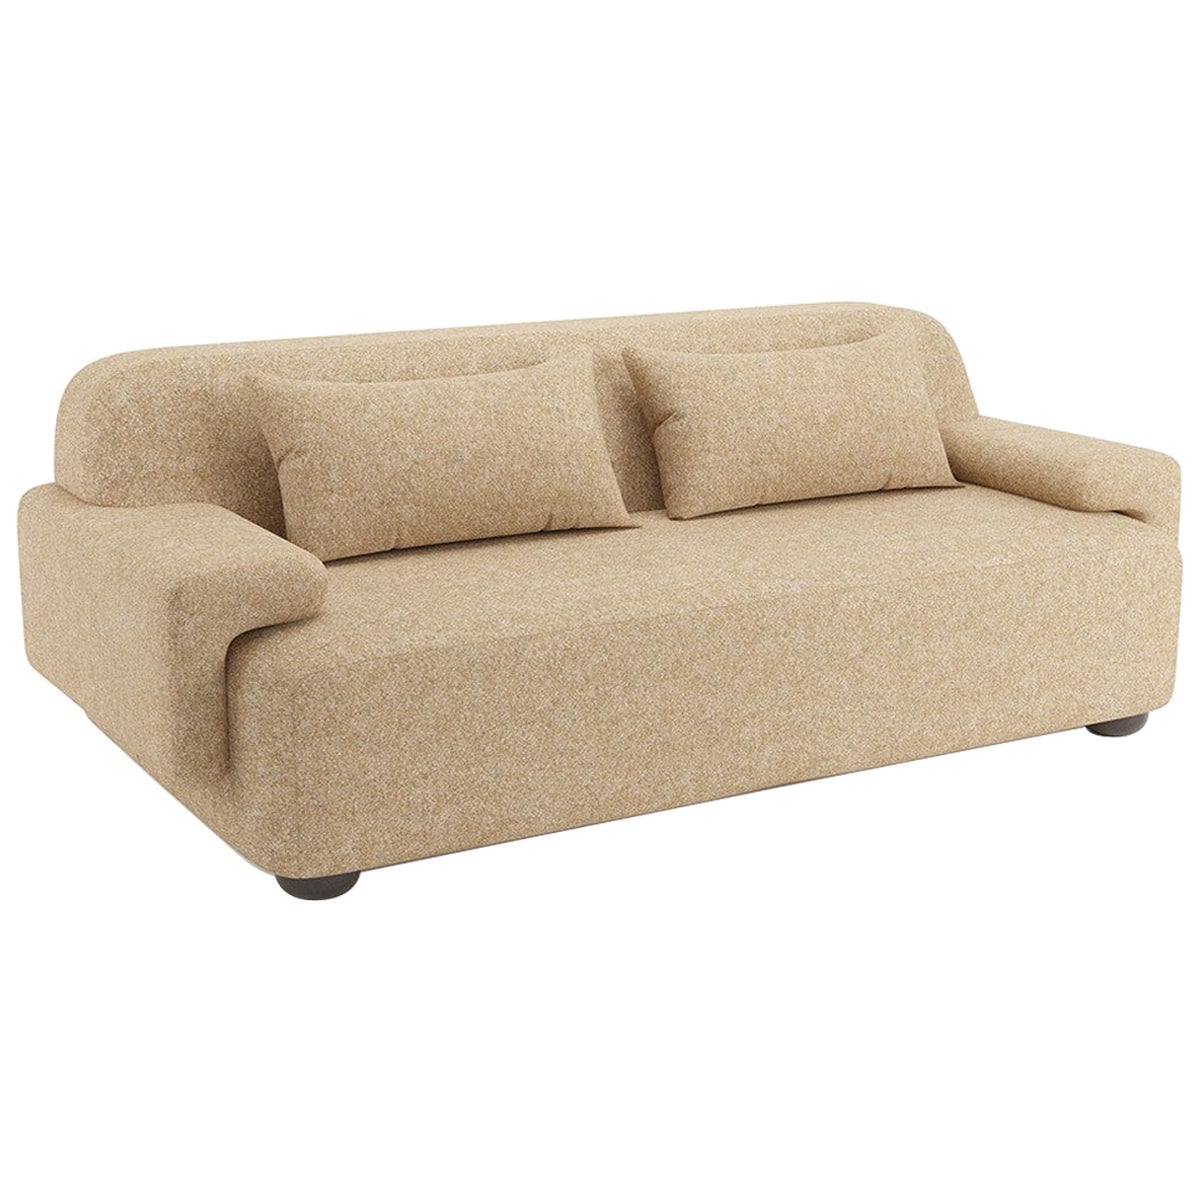 Popus Editions Lena 4 Seater Sofa in Saffron Antwerp Linen Upholstery For Sale